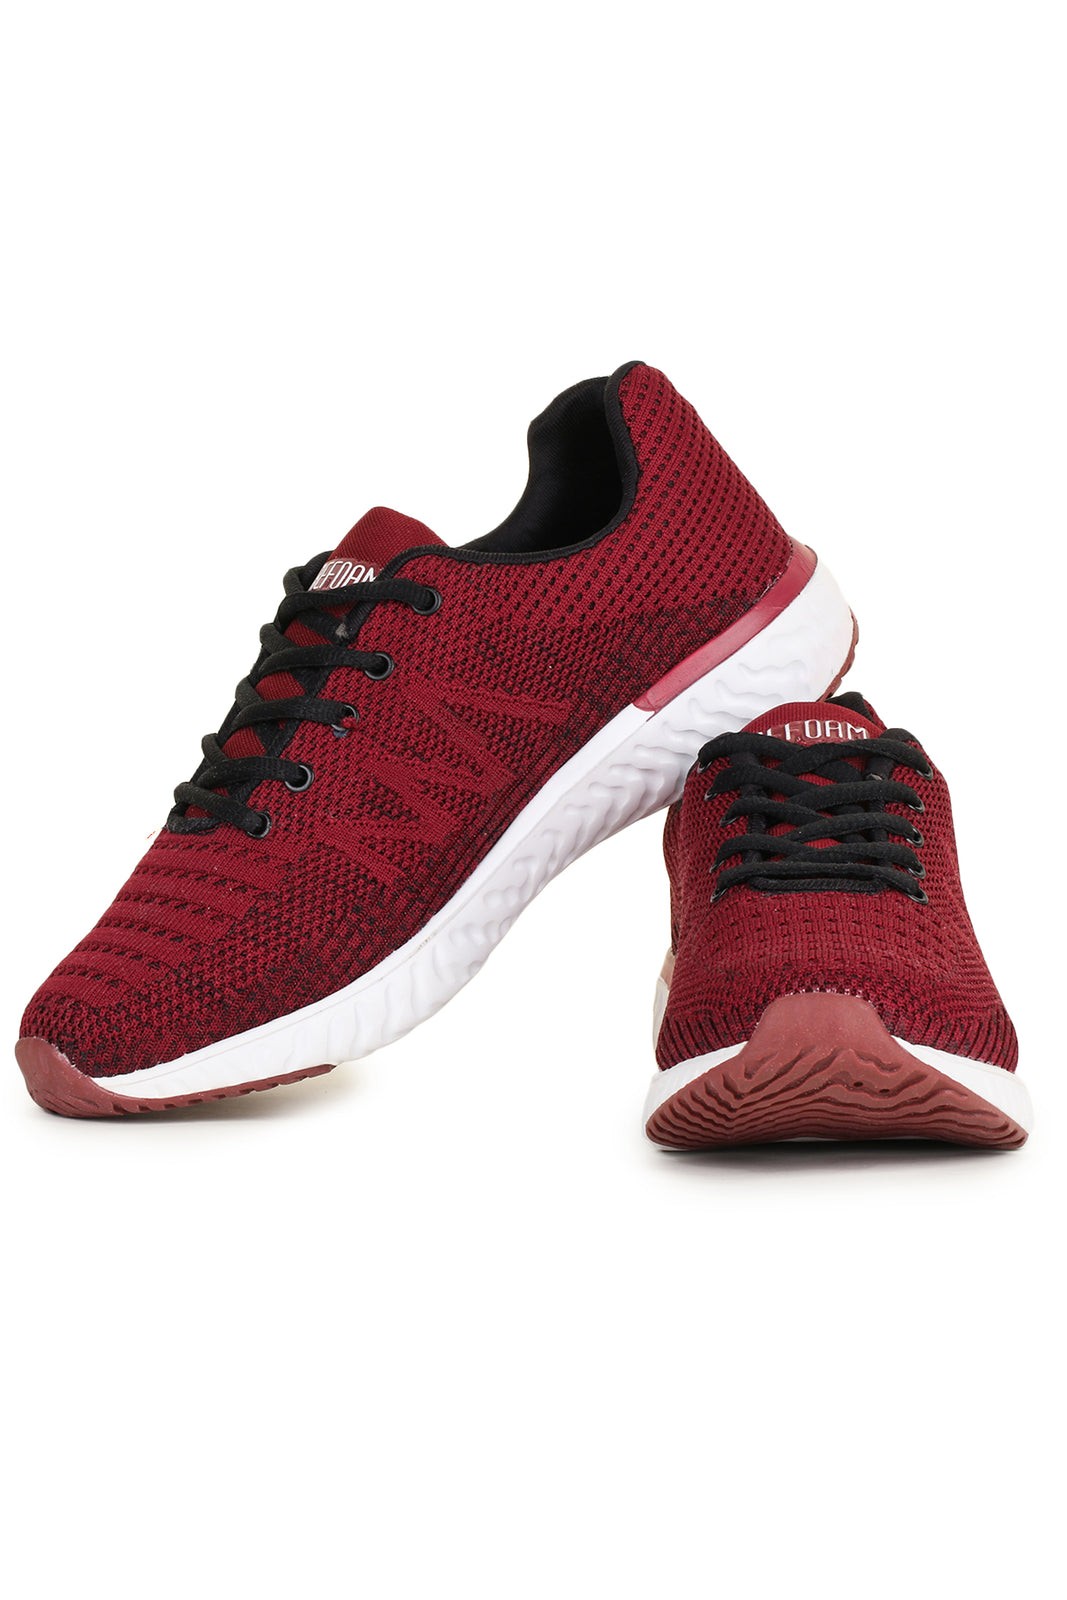 Maroon Solid Mesh Lace Up Running Sport Shoes For Men